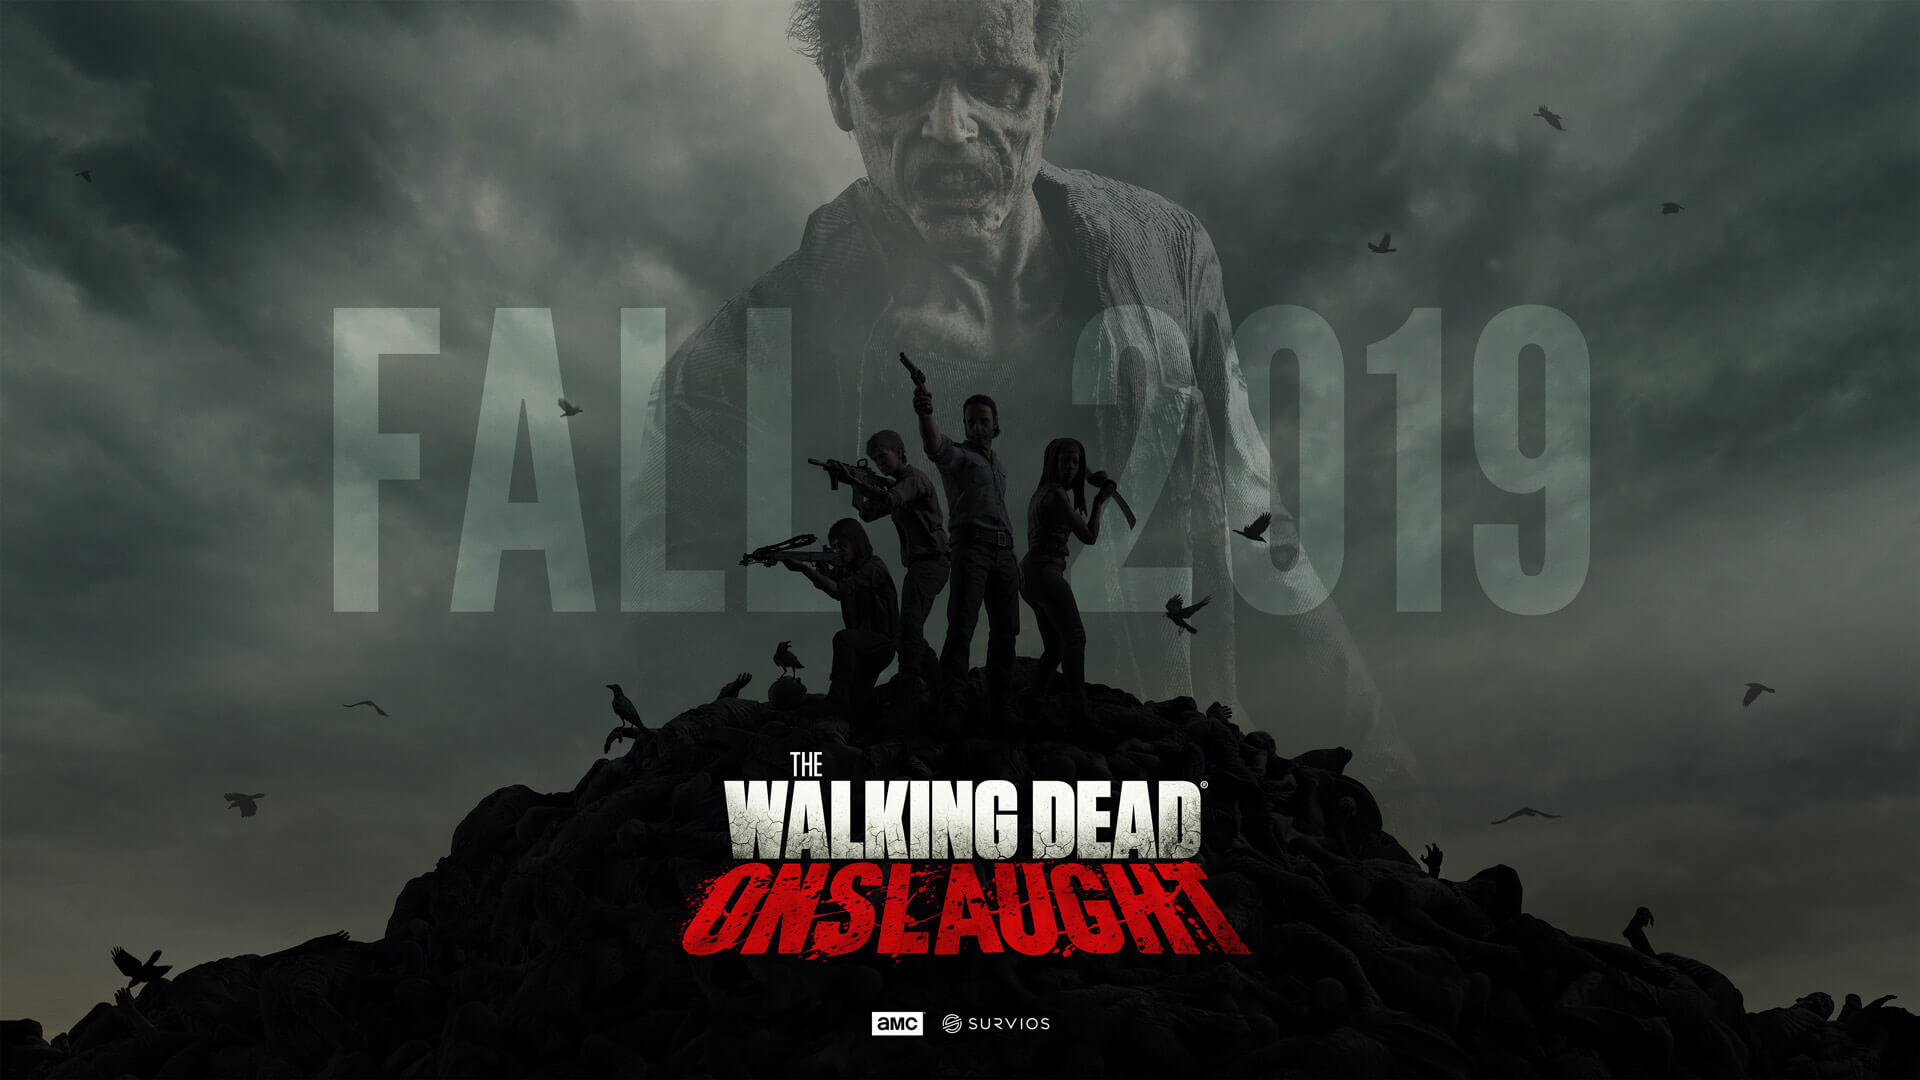 the walking dead game download free pc full